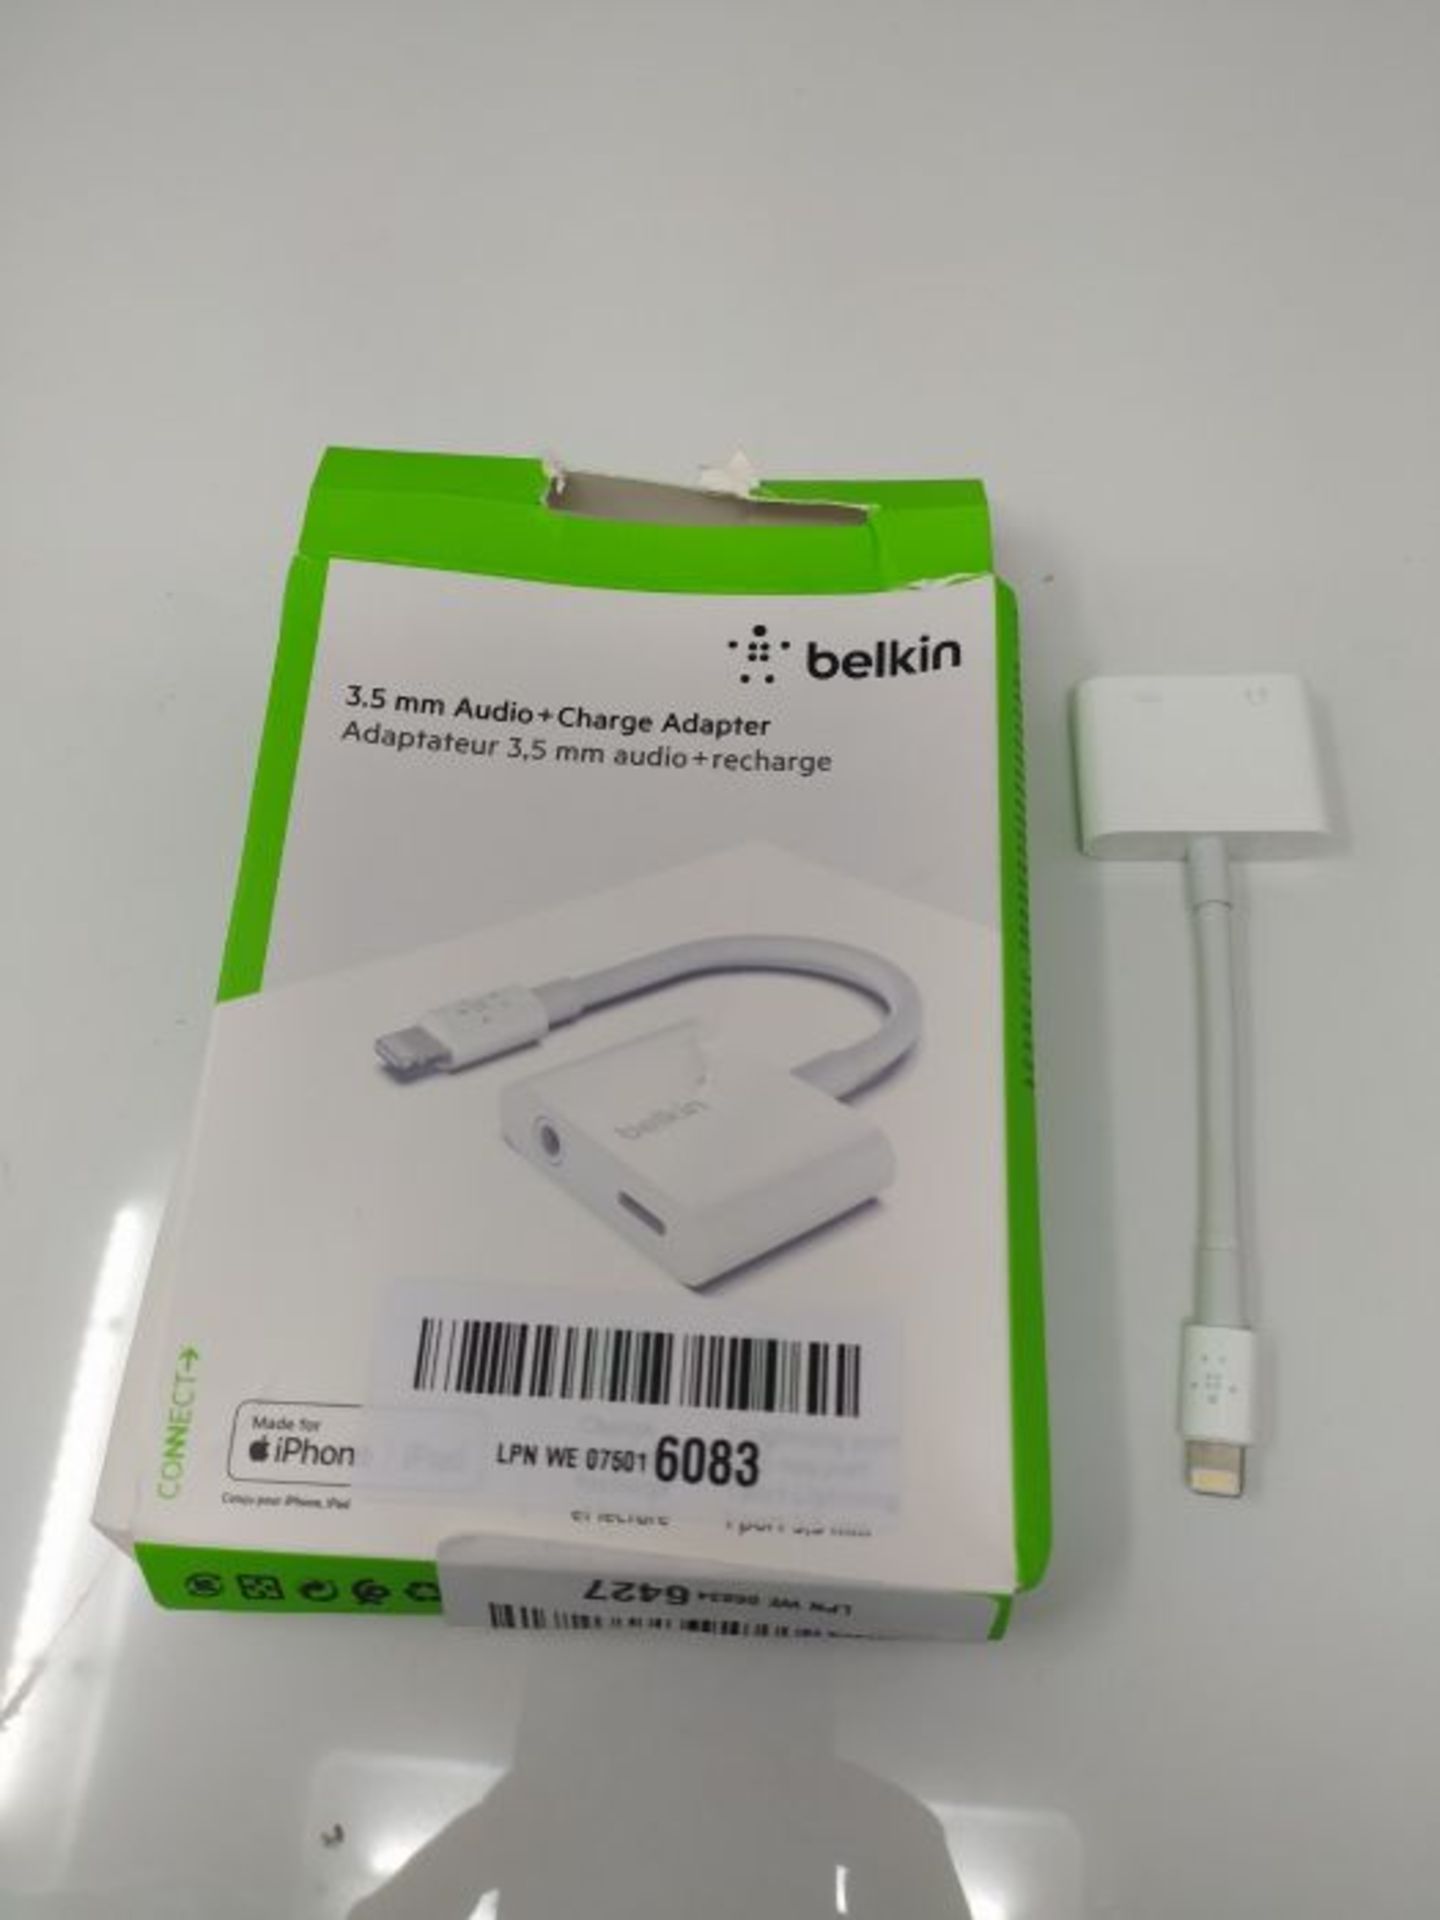 Belkin 3.5 mm Audio + Charge Rockstar (iPhone Aux Adapter/iPhone Charging Adapter for - Image 2 of 2